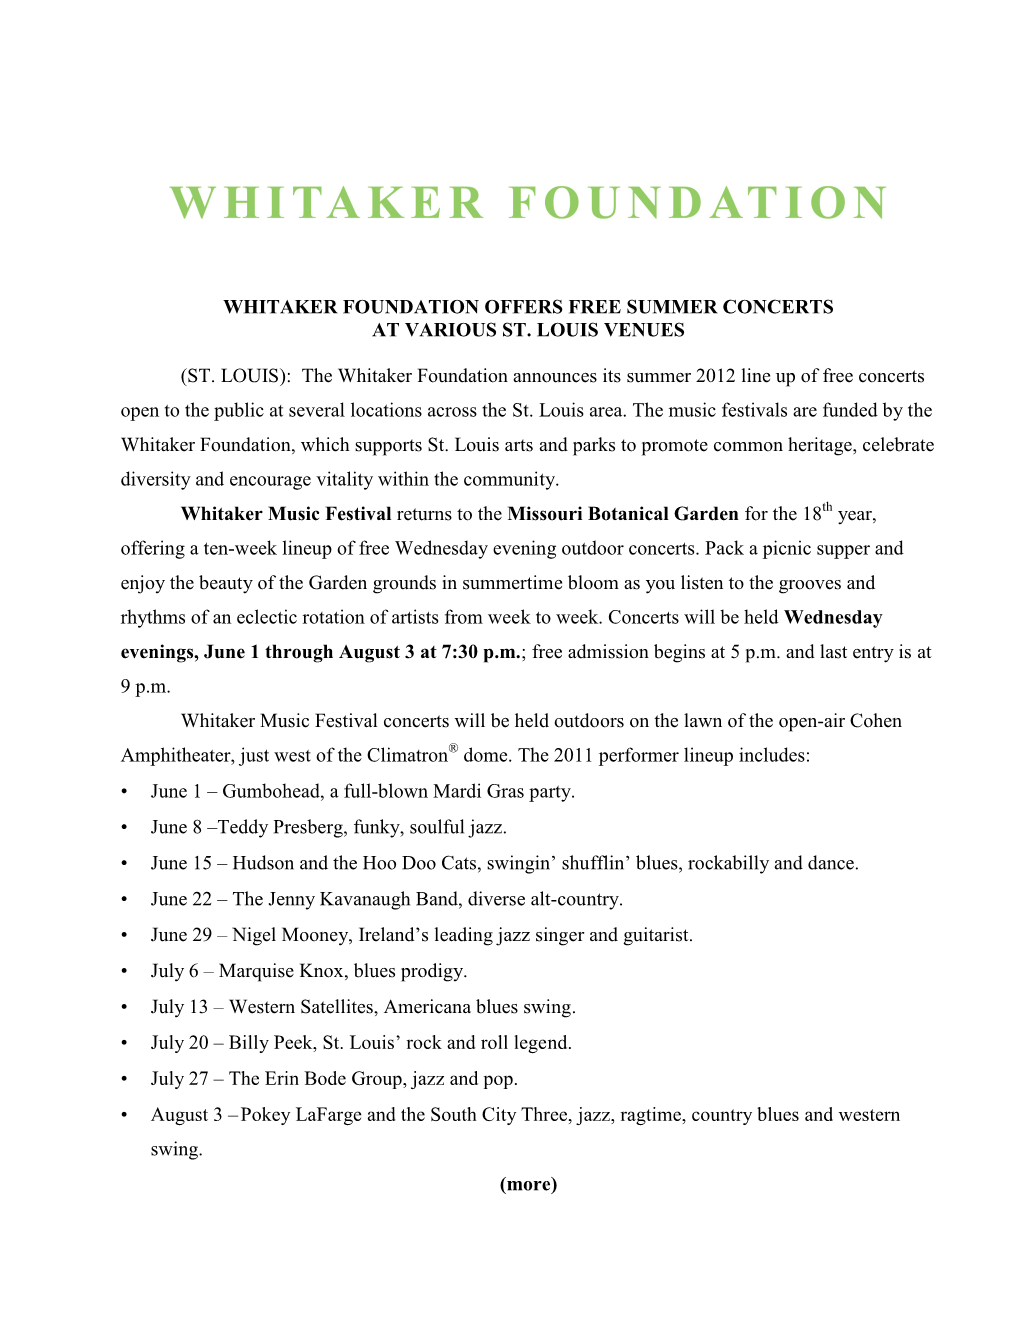 The Whitaker Foundation Announces Its Summer 2012 Line up of Free Concerts Open to the Public at Several Locations Across the St